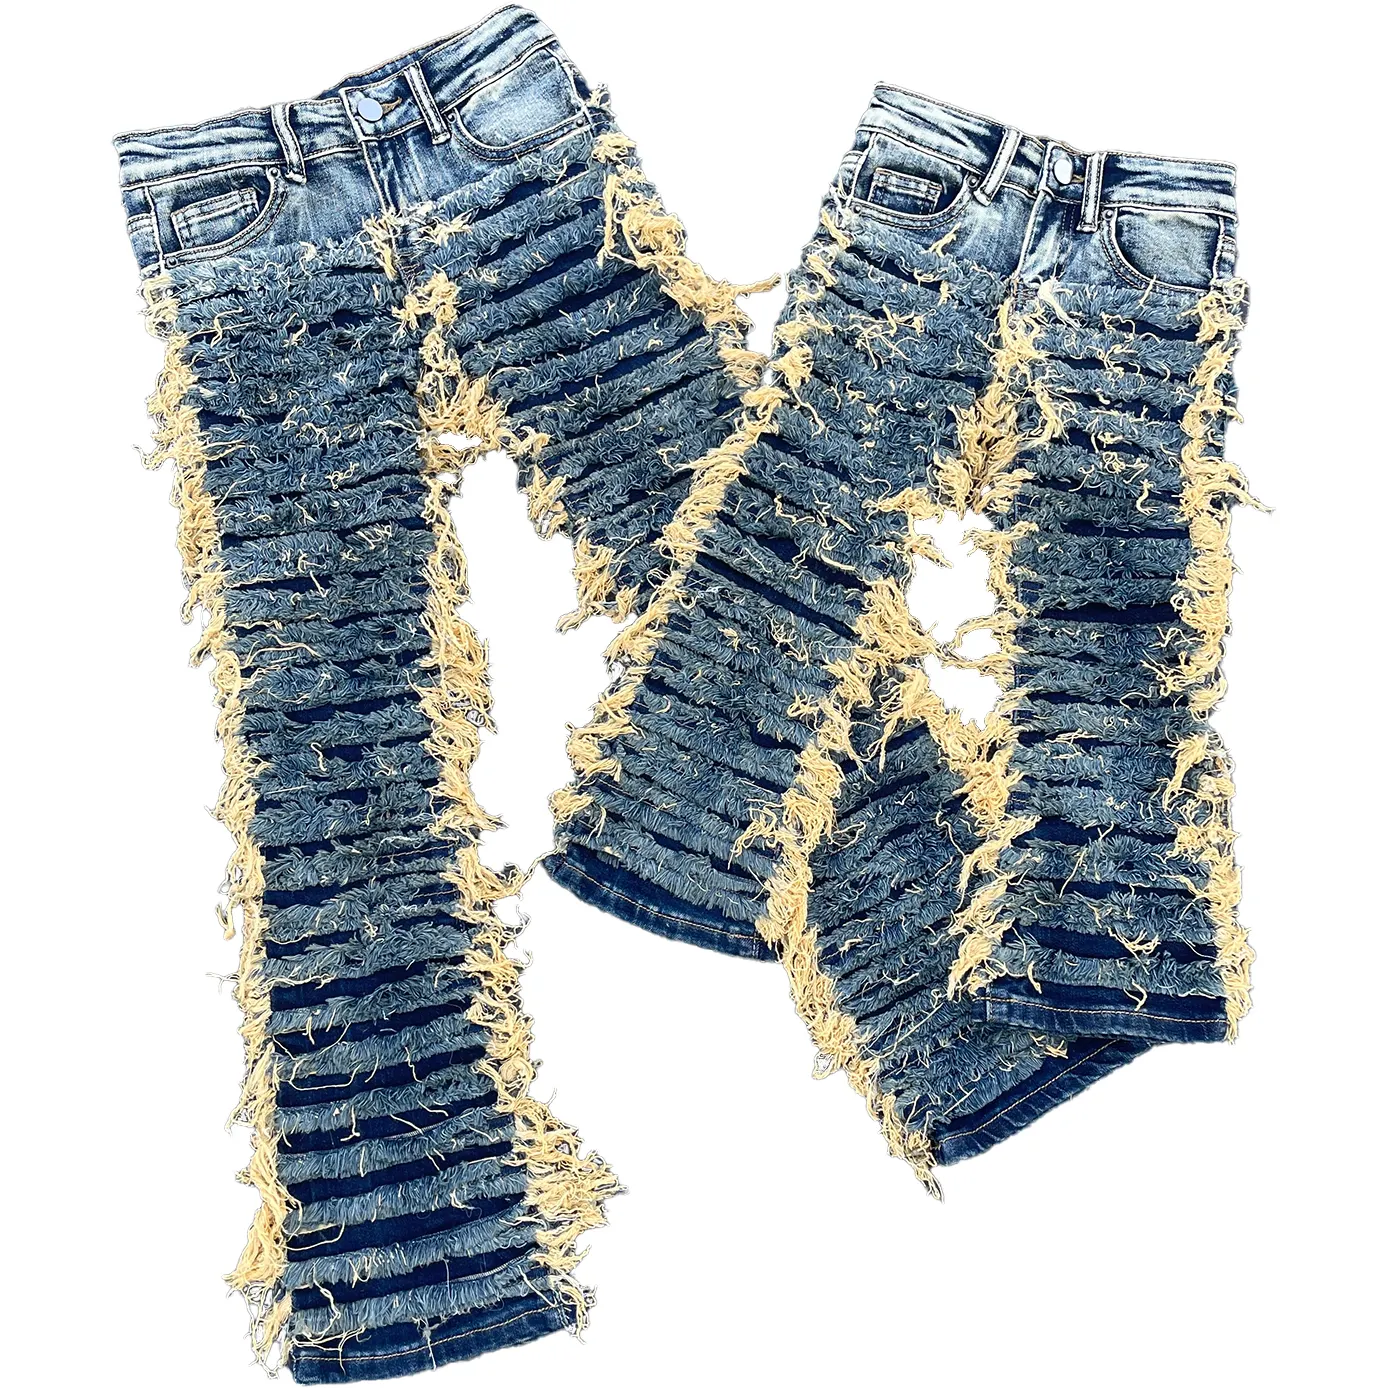 ZhuoYang garment Denim manufactured Customization 1-14 years old Kids Flared Fit Jeans Stacked Denim Jeans For Boys